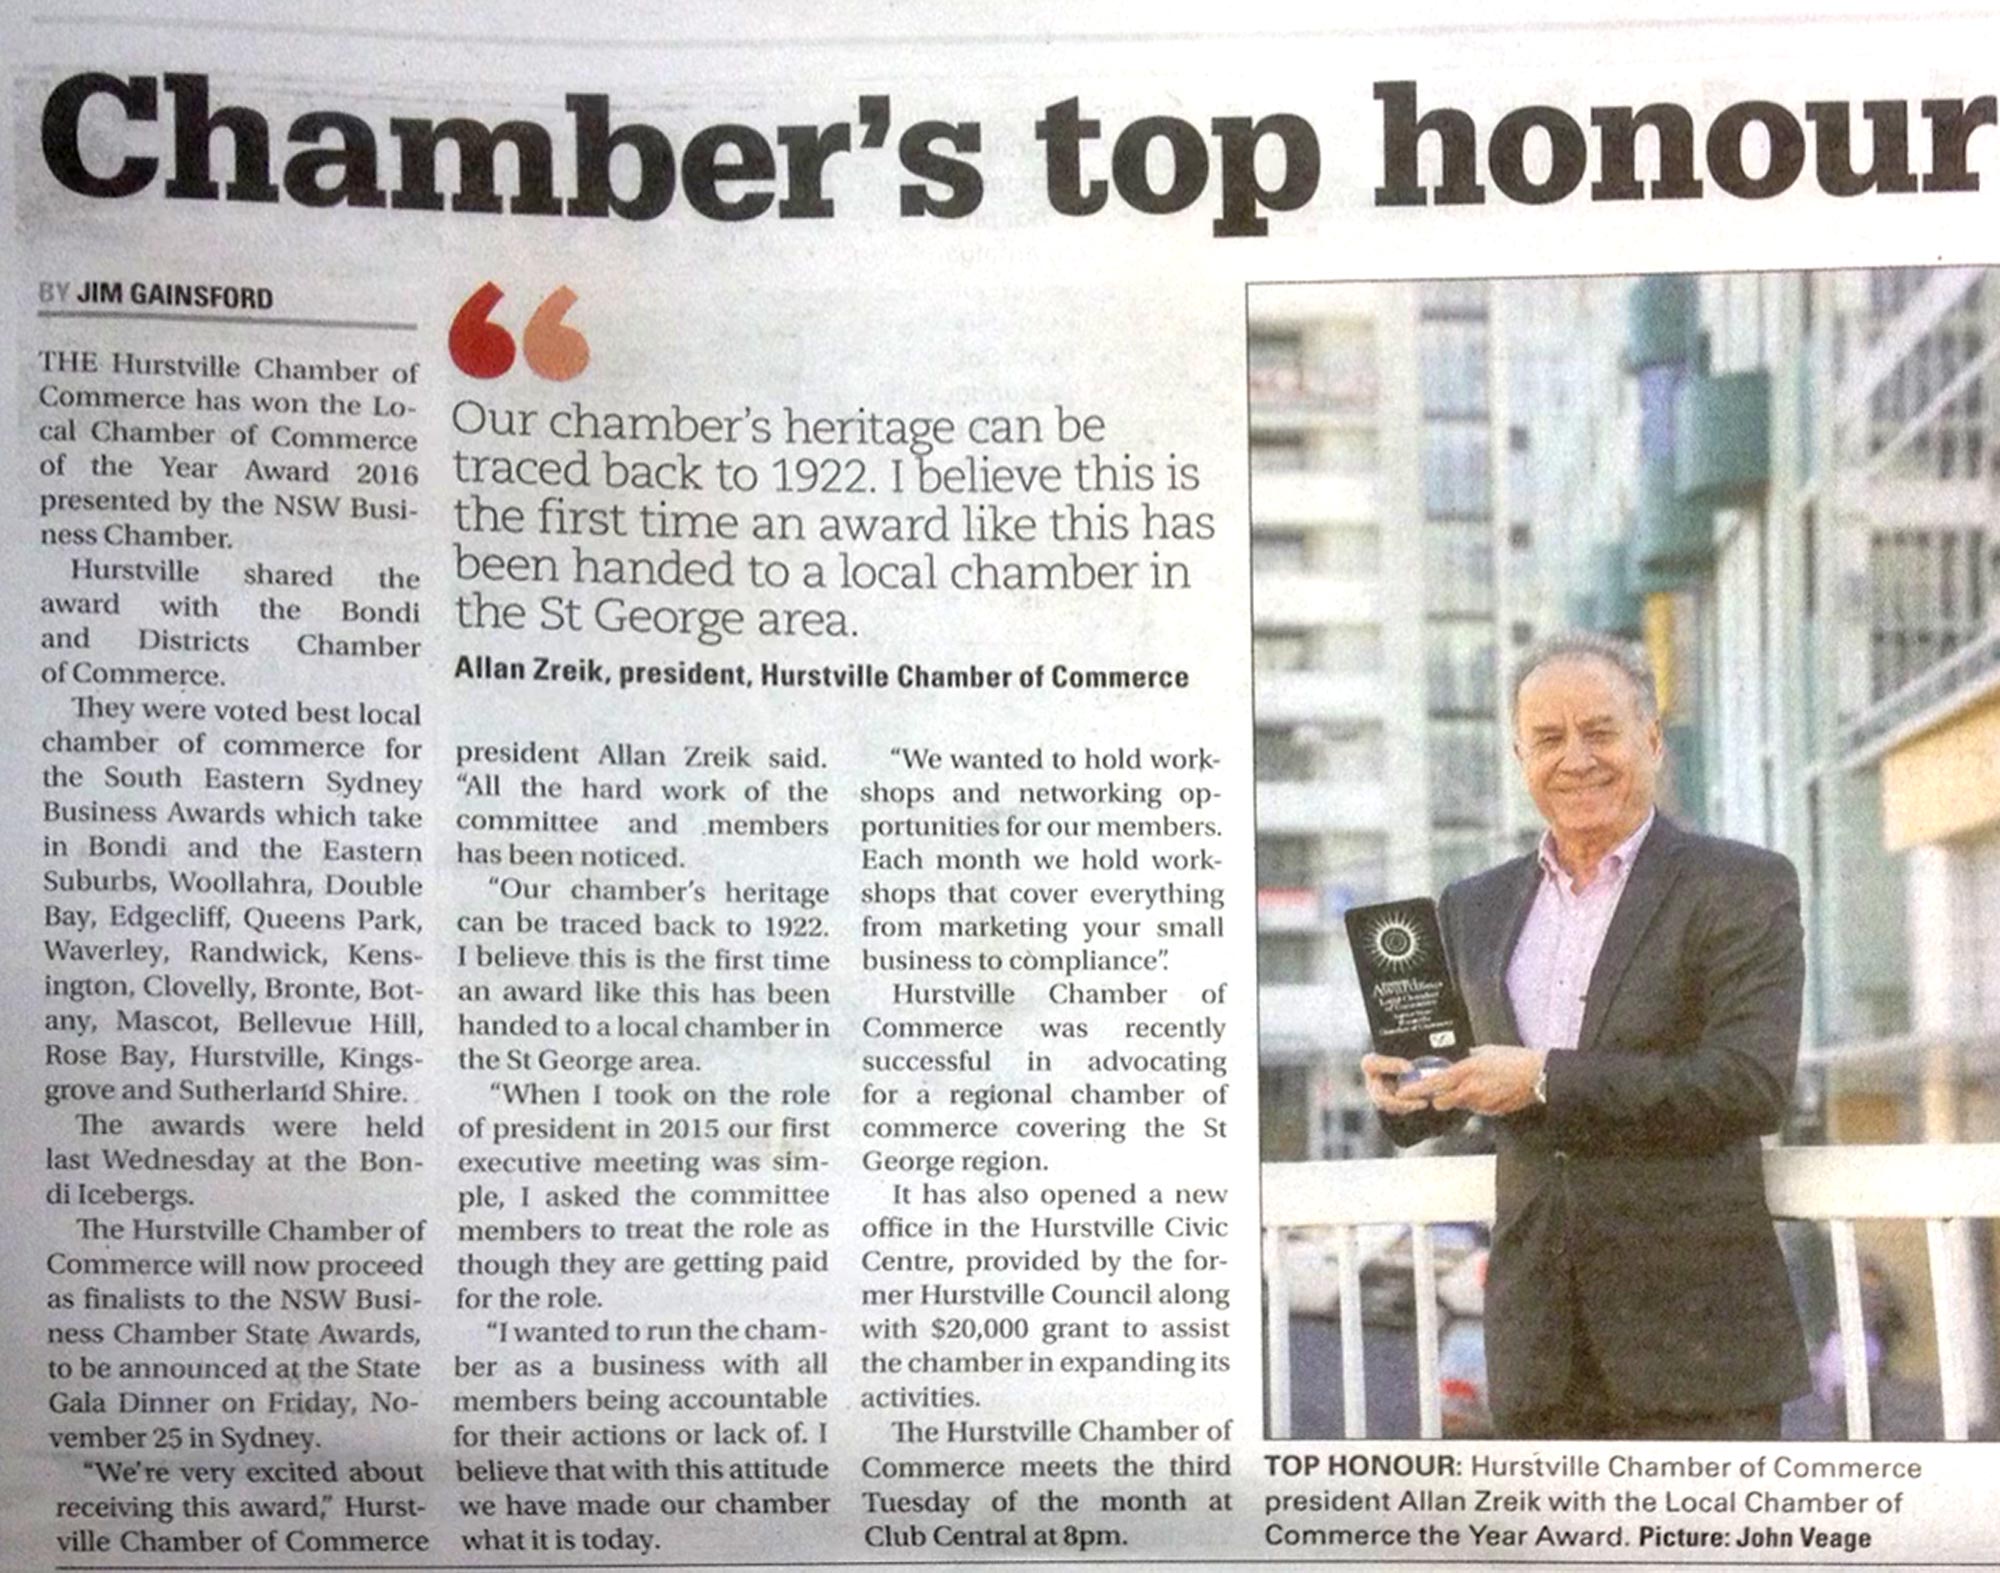 Chamber's Top Honour